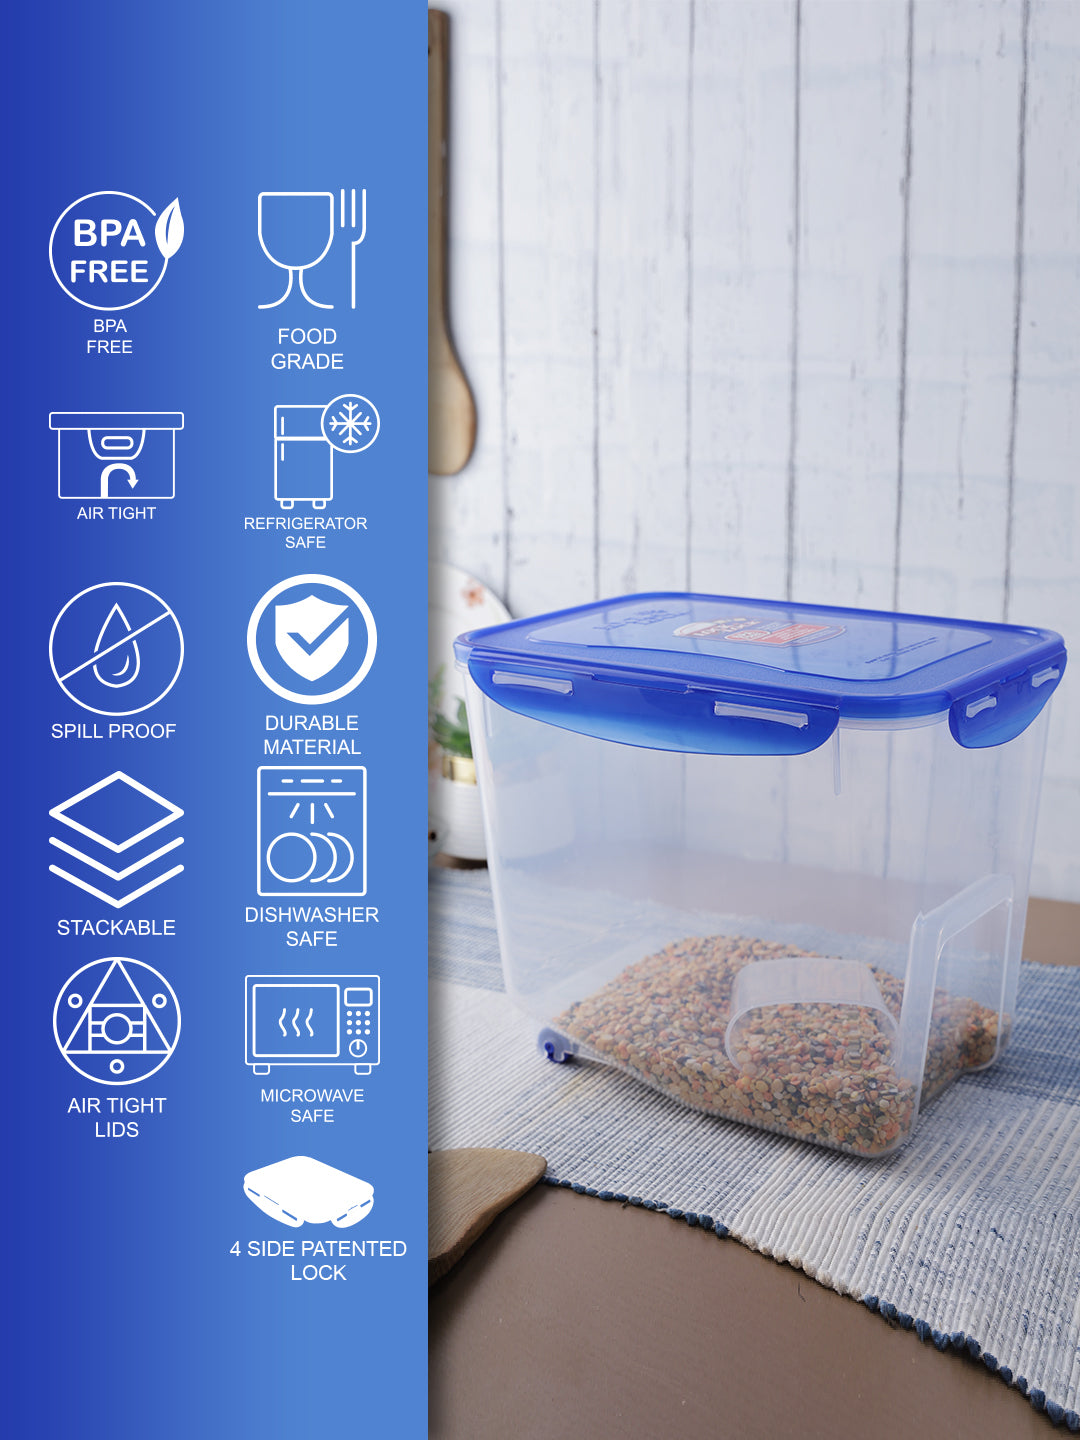 Rice Container - 5KG/7LTR